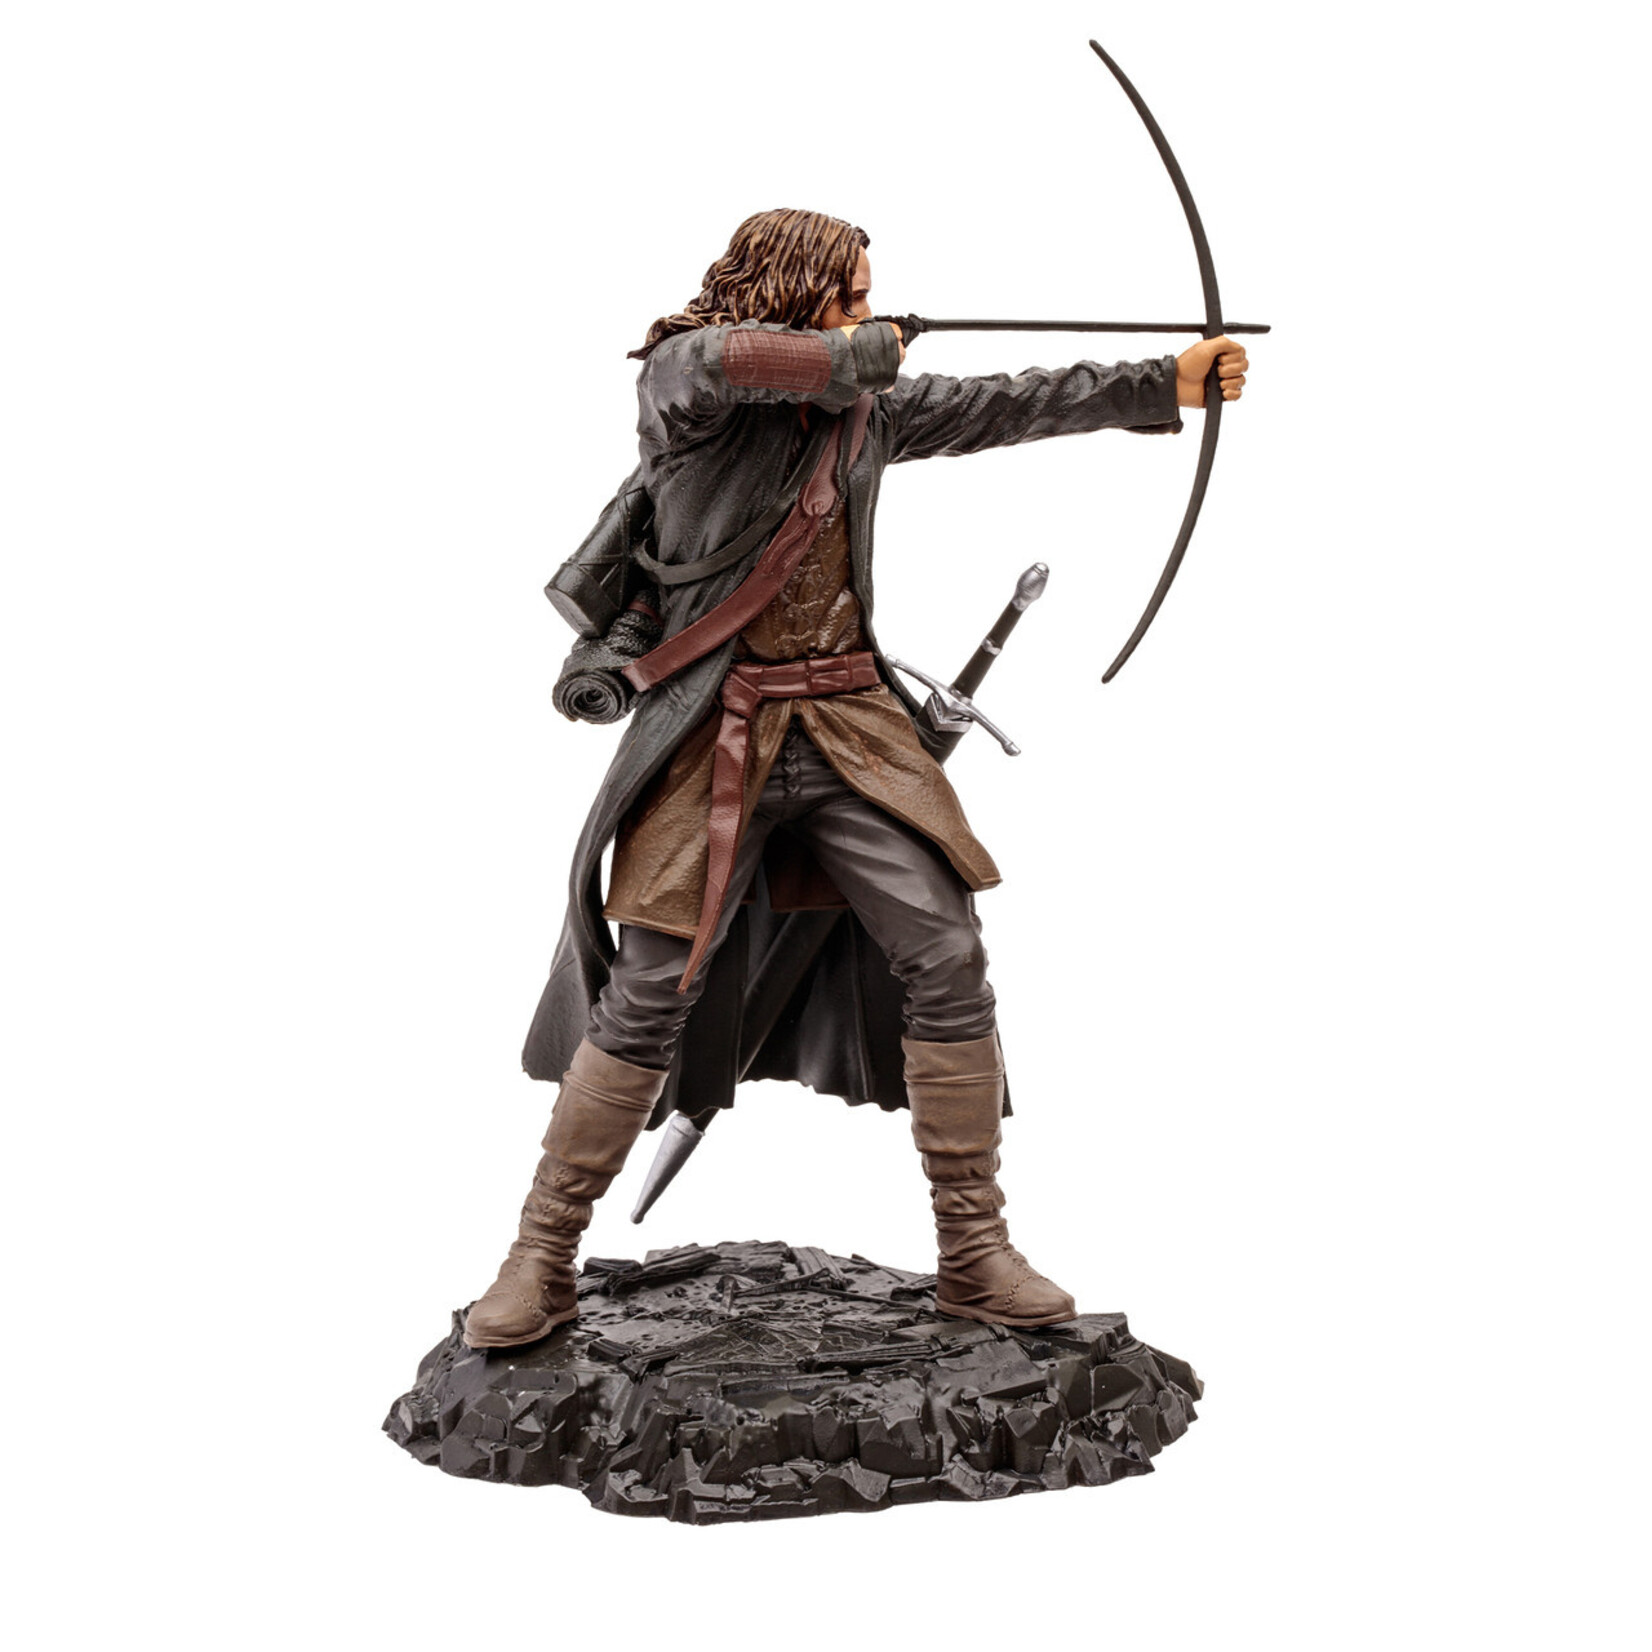 McFarlane Toys McFarlane Toys Lord of the Rings Movie Maniacs Action Figure Aragorn 15 cm